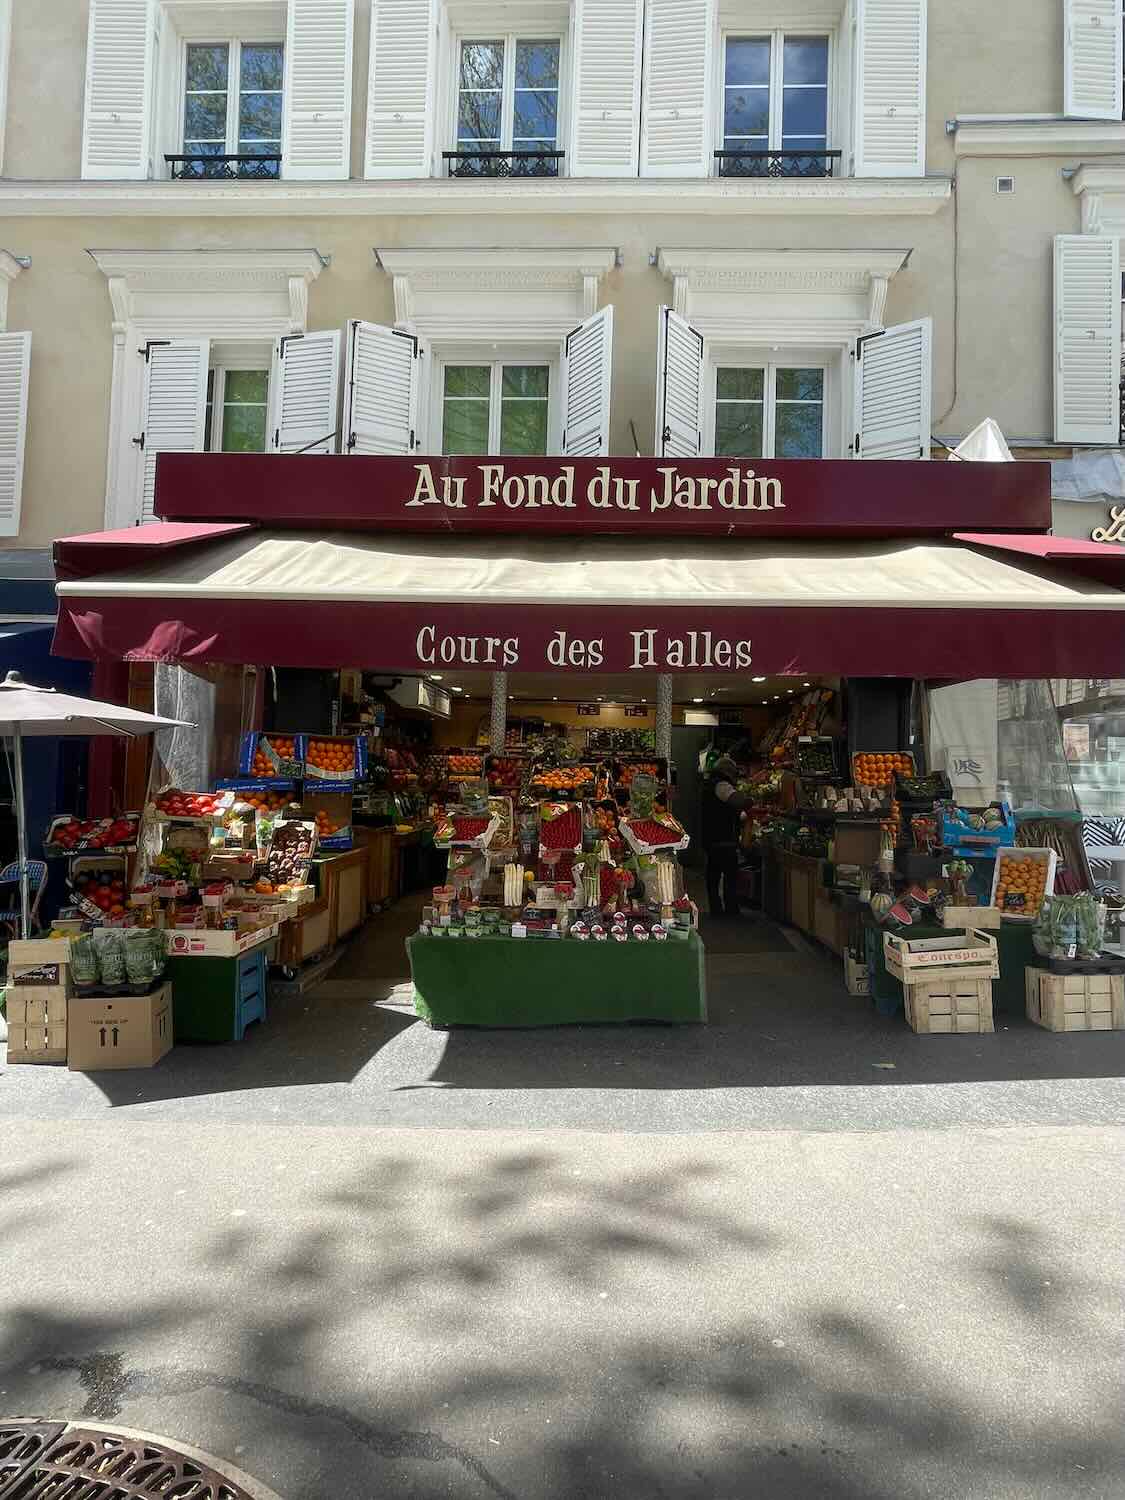 A vibrant market stall at Au Fond du Jardin in Paris, displaying a colorful assortment of fresh fruits and vegetables under a maroon awning on a sunny day.